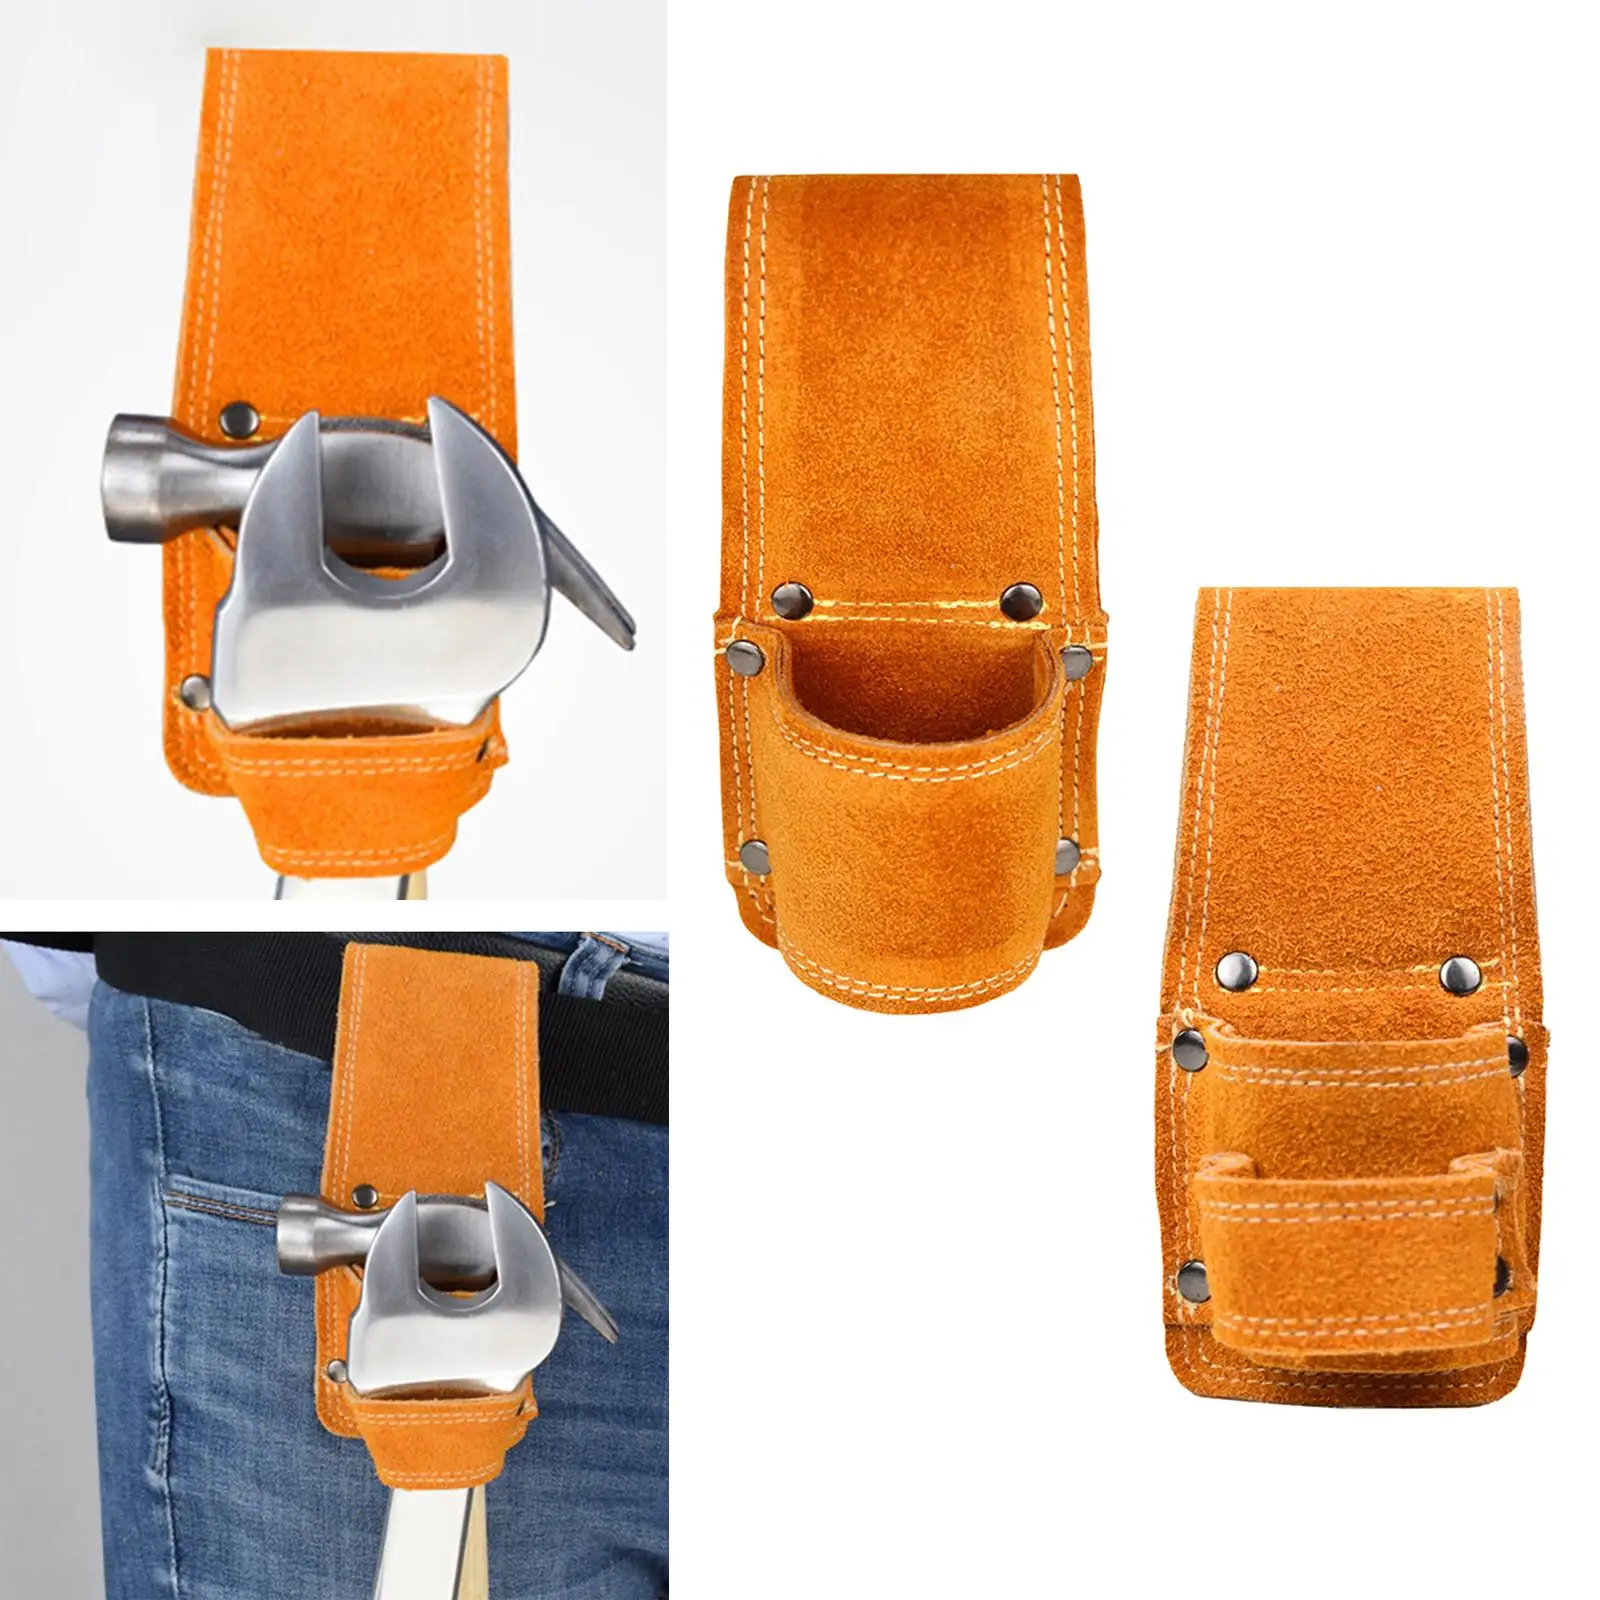 PU Leather Small Hammer Hatchet Carrier Holster Pocket Sheath for Carpenters